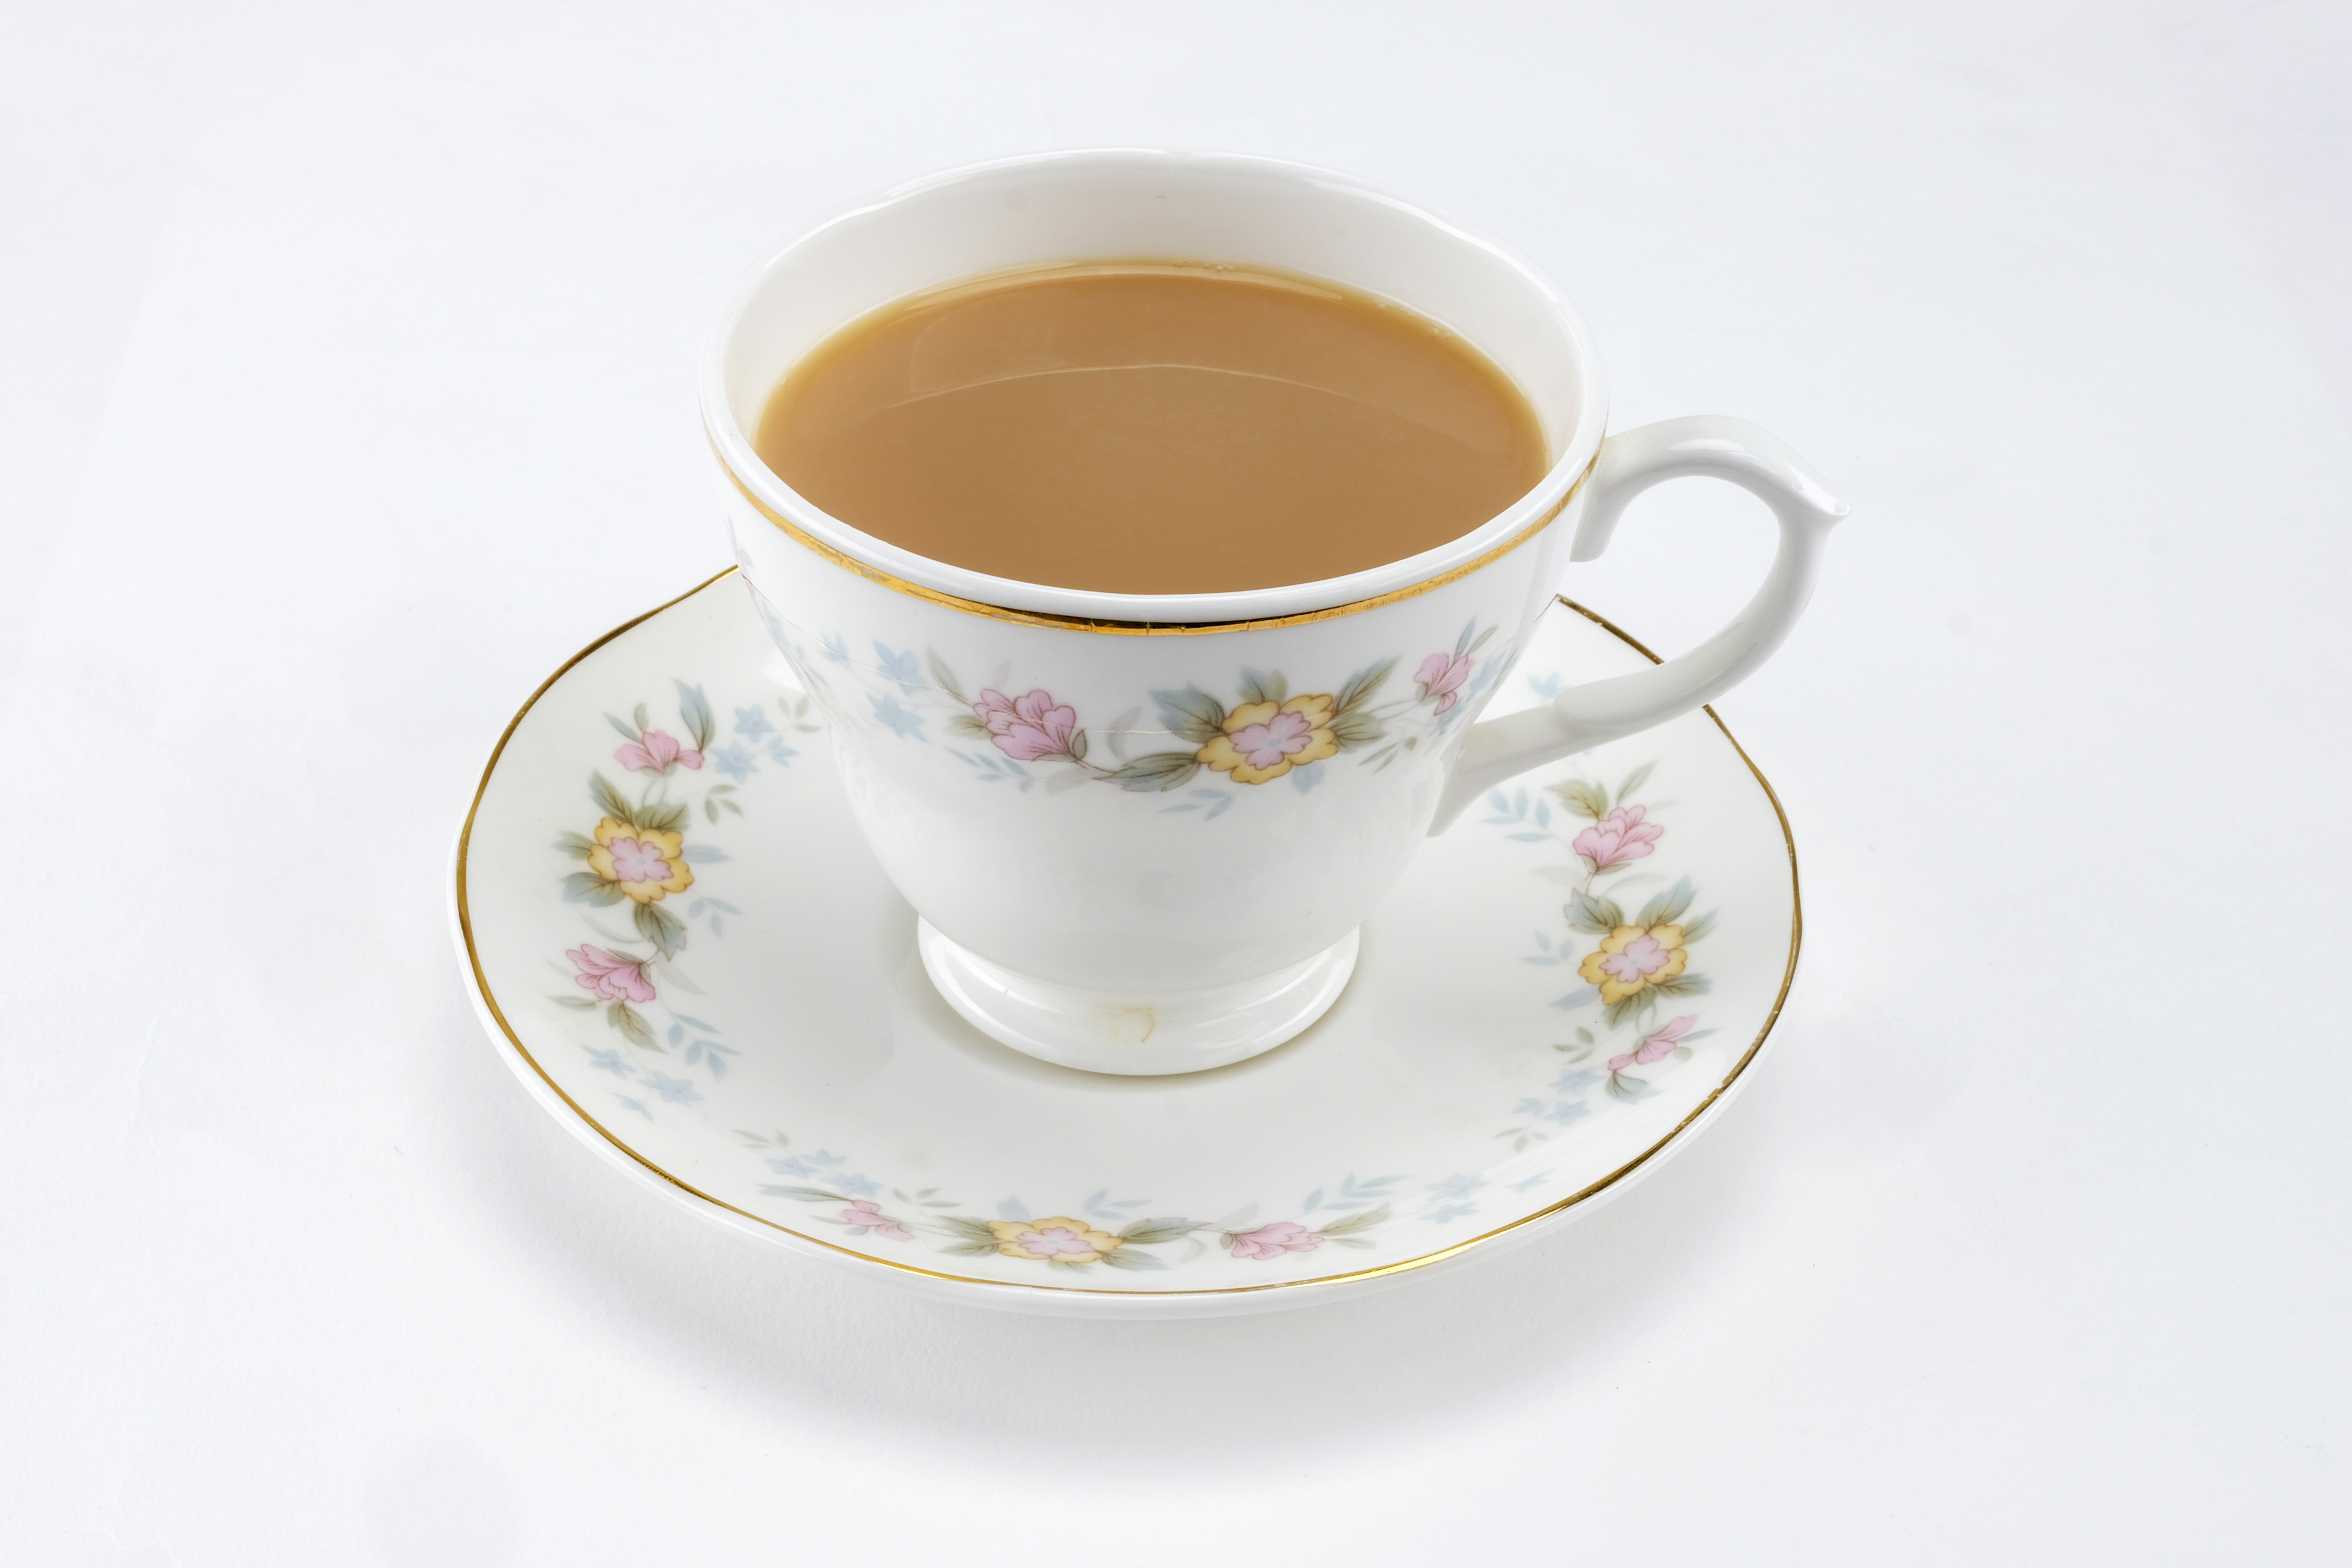 UK People Who Drink Tea Daily See Lower Risk of Death, Study Finds -  Bloomberg